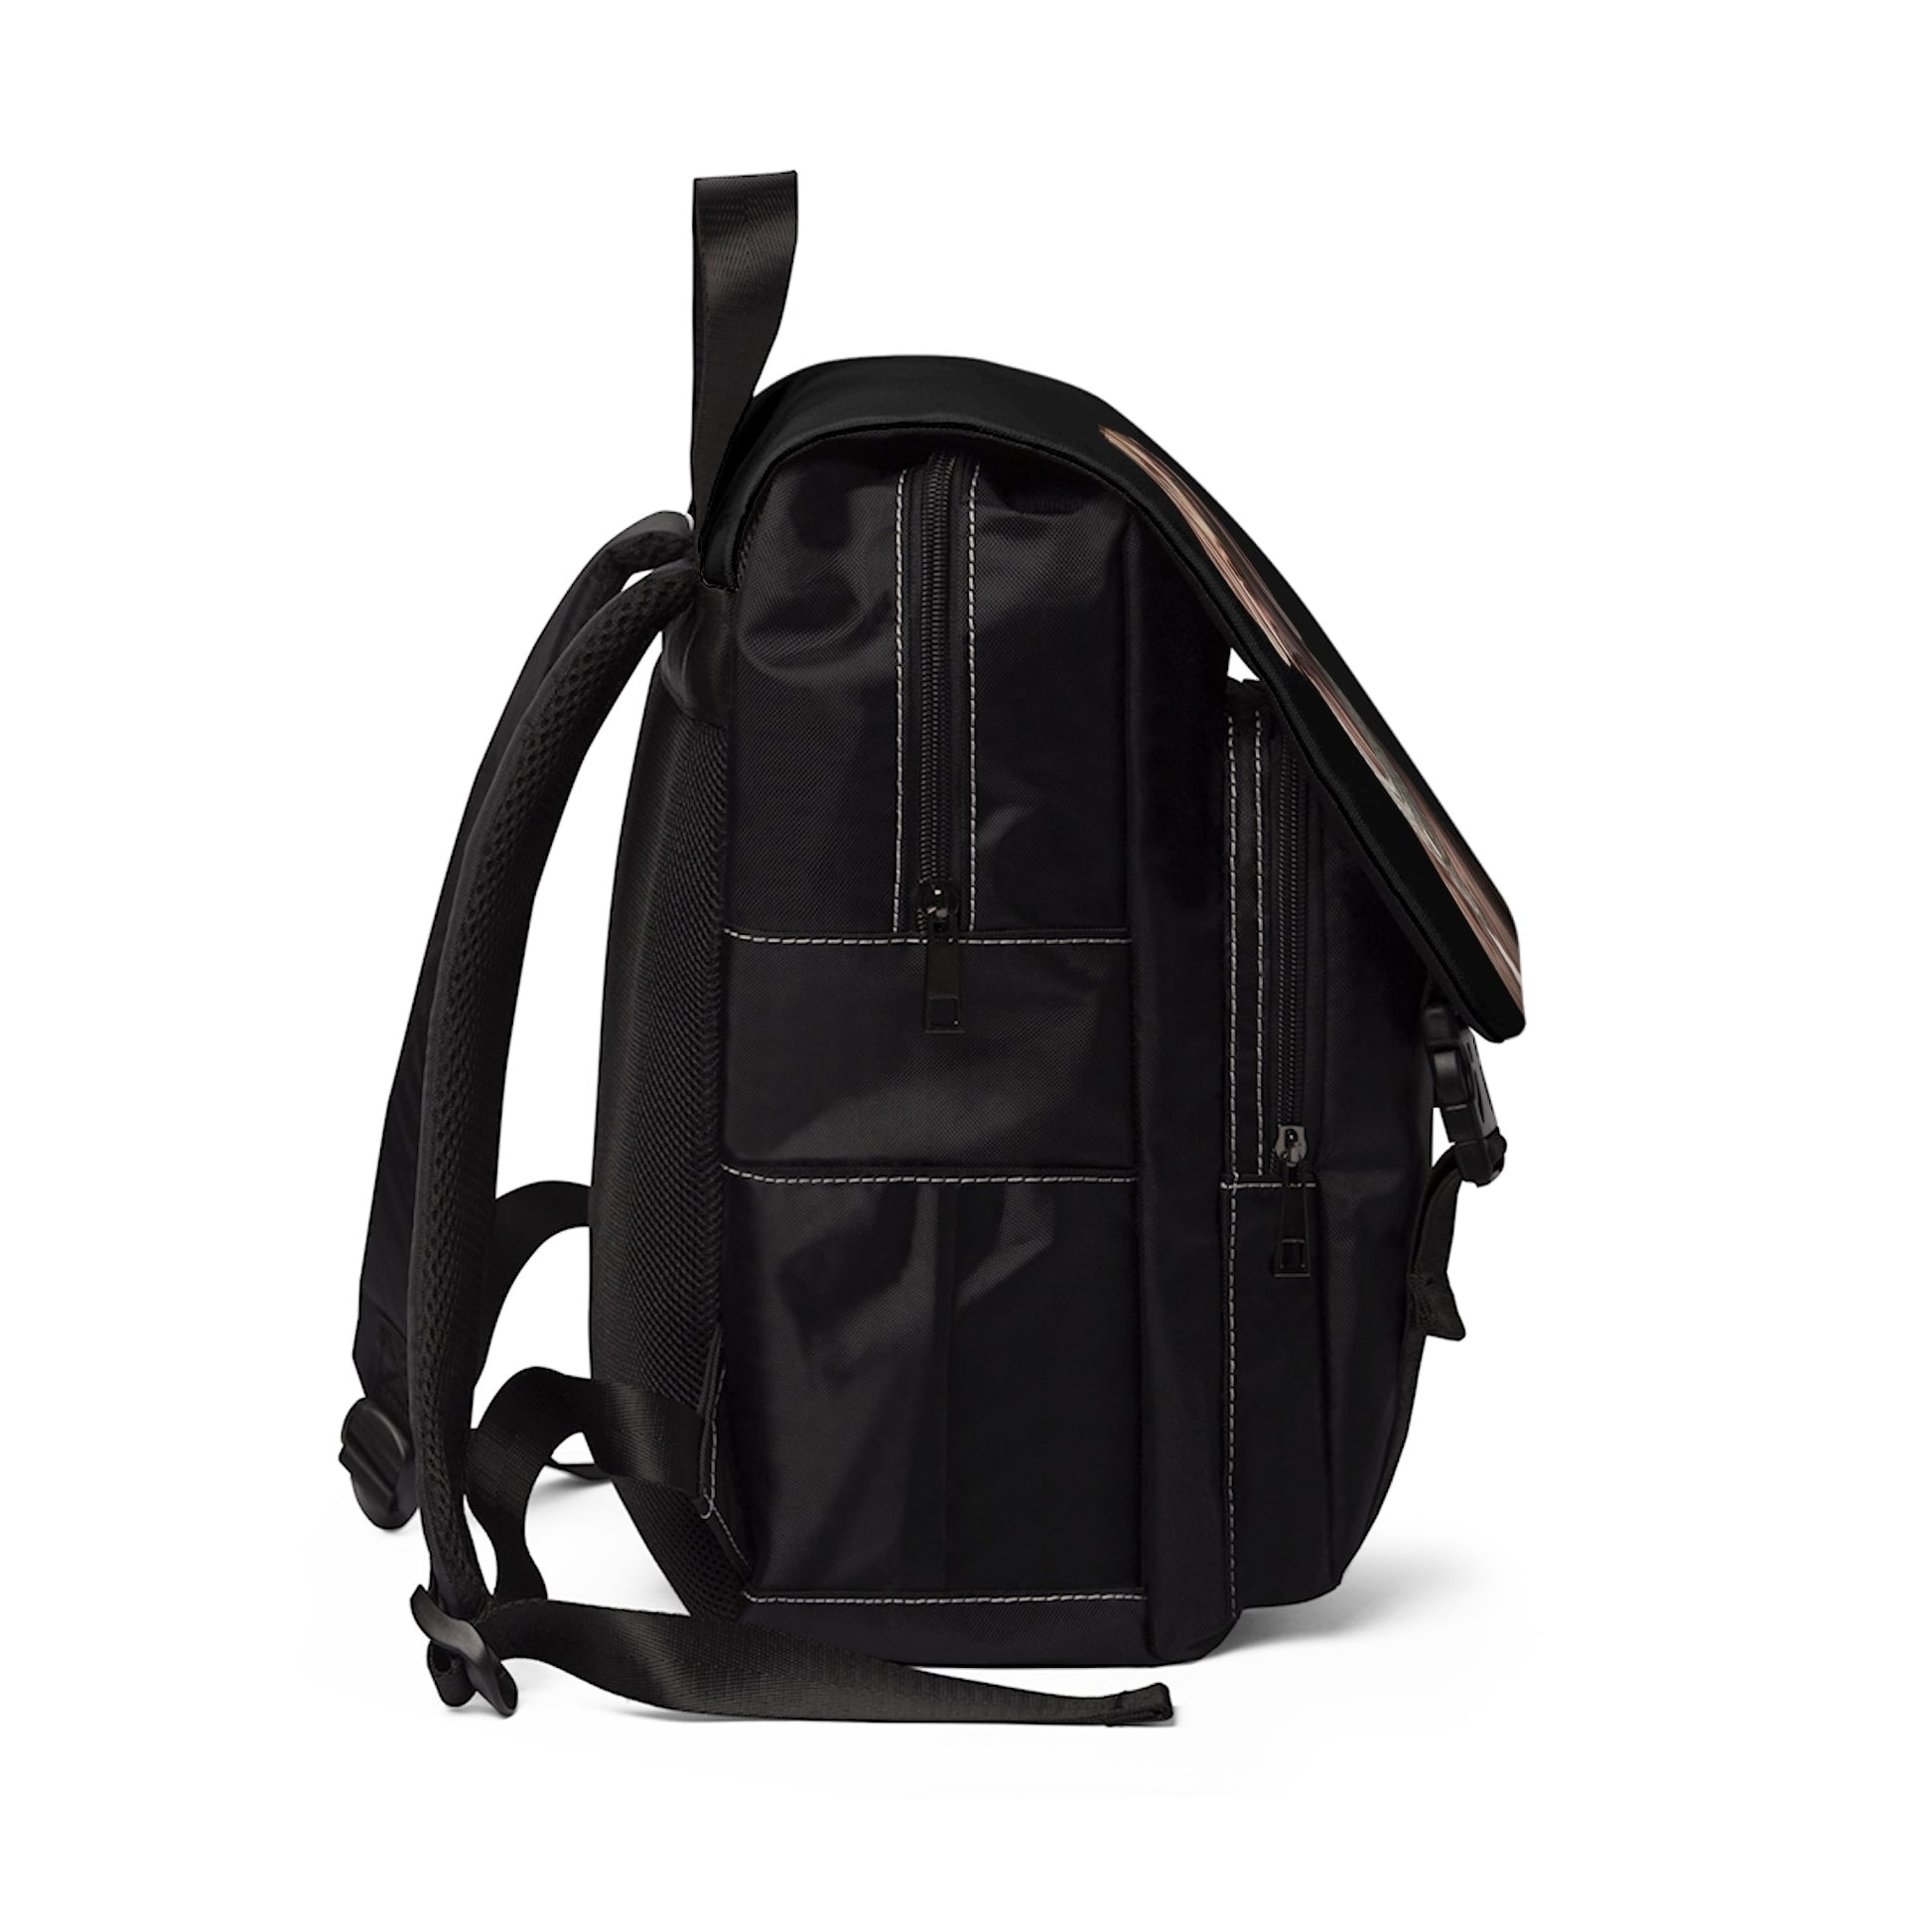 WINNIE : Unisex Casual Shoulder Backpack - Shaggy Chic